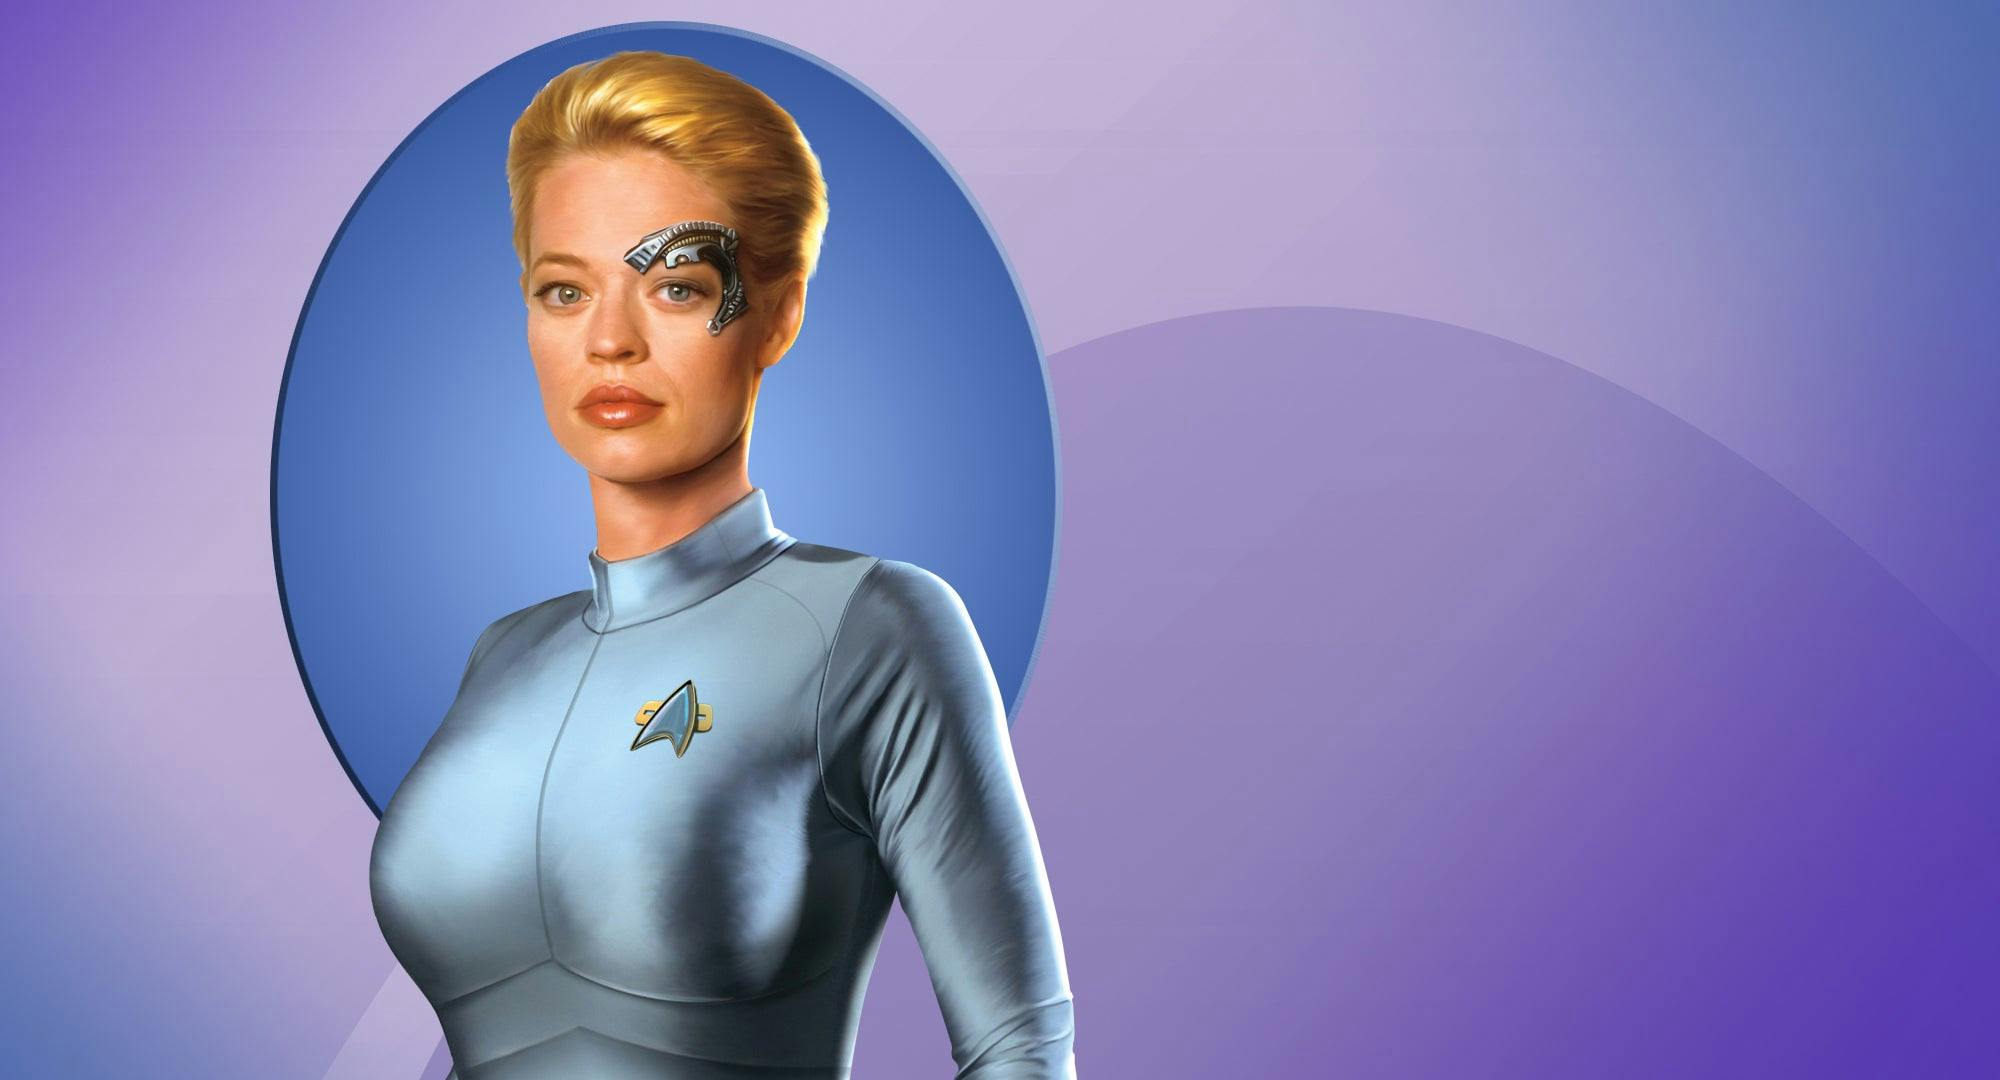 dong jin woo recommends Seven Of Nine Images